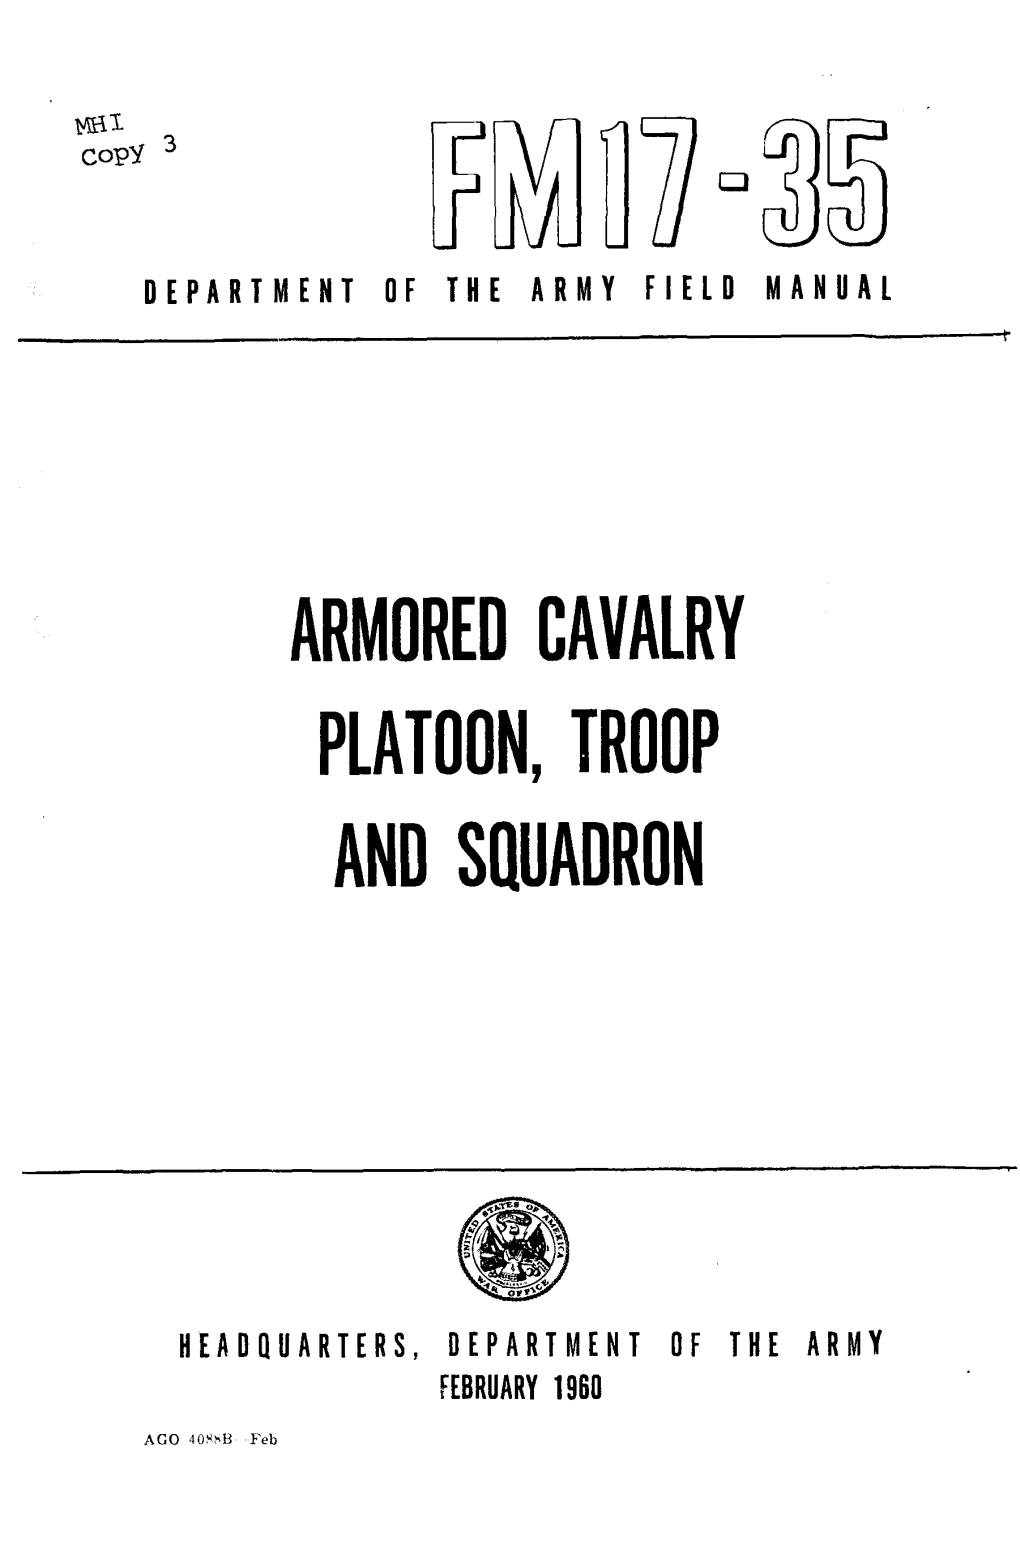 Armored Cavalry Platoon, Troop and Squadron